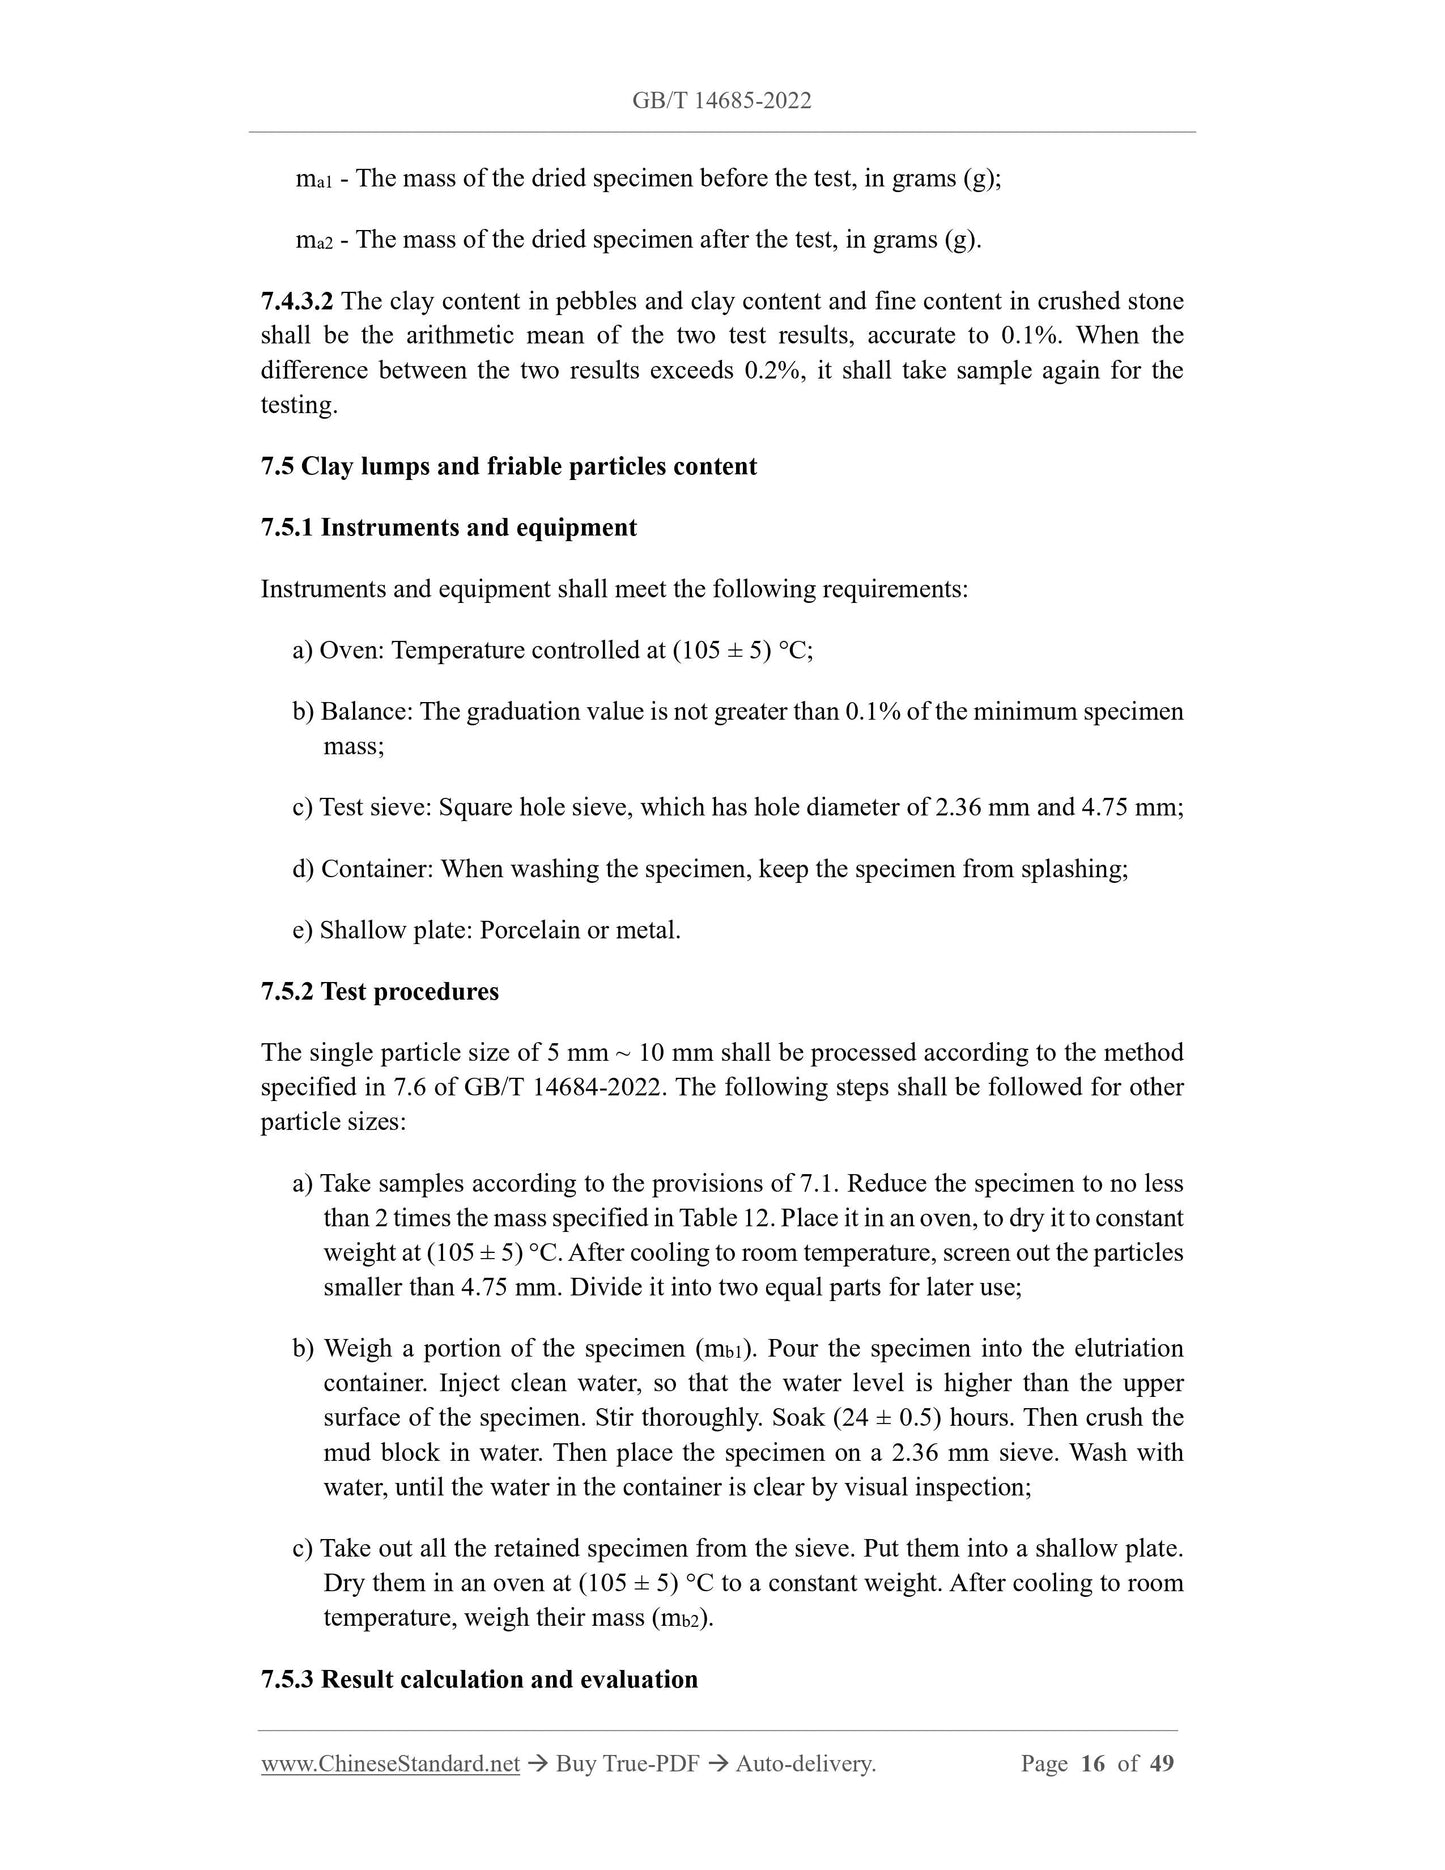 GB/T 14685-2022 Page 5